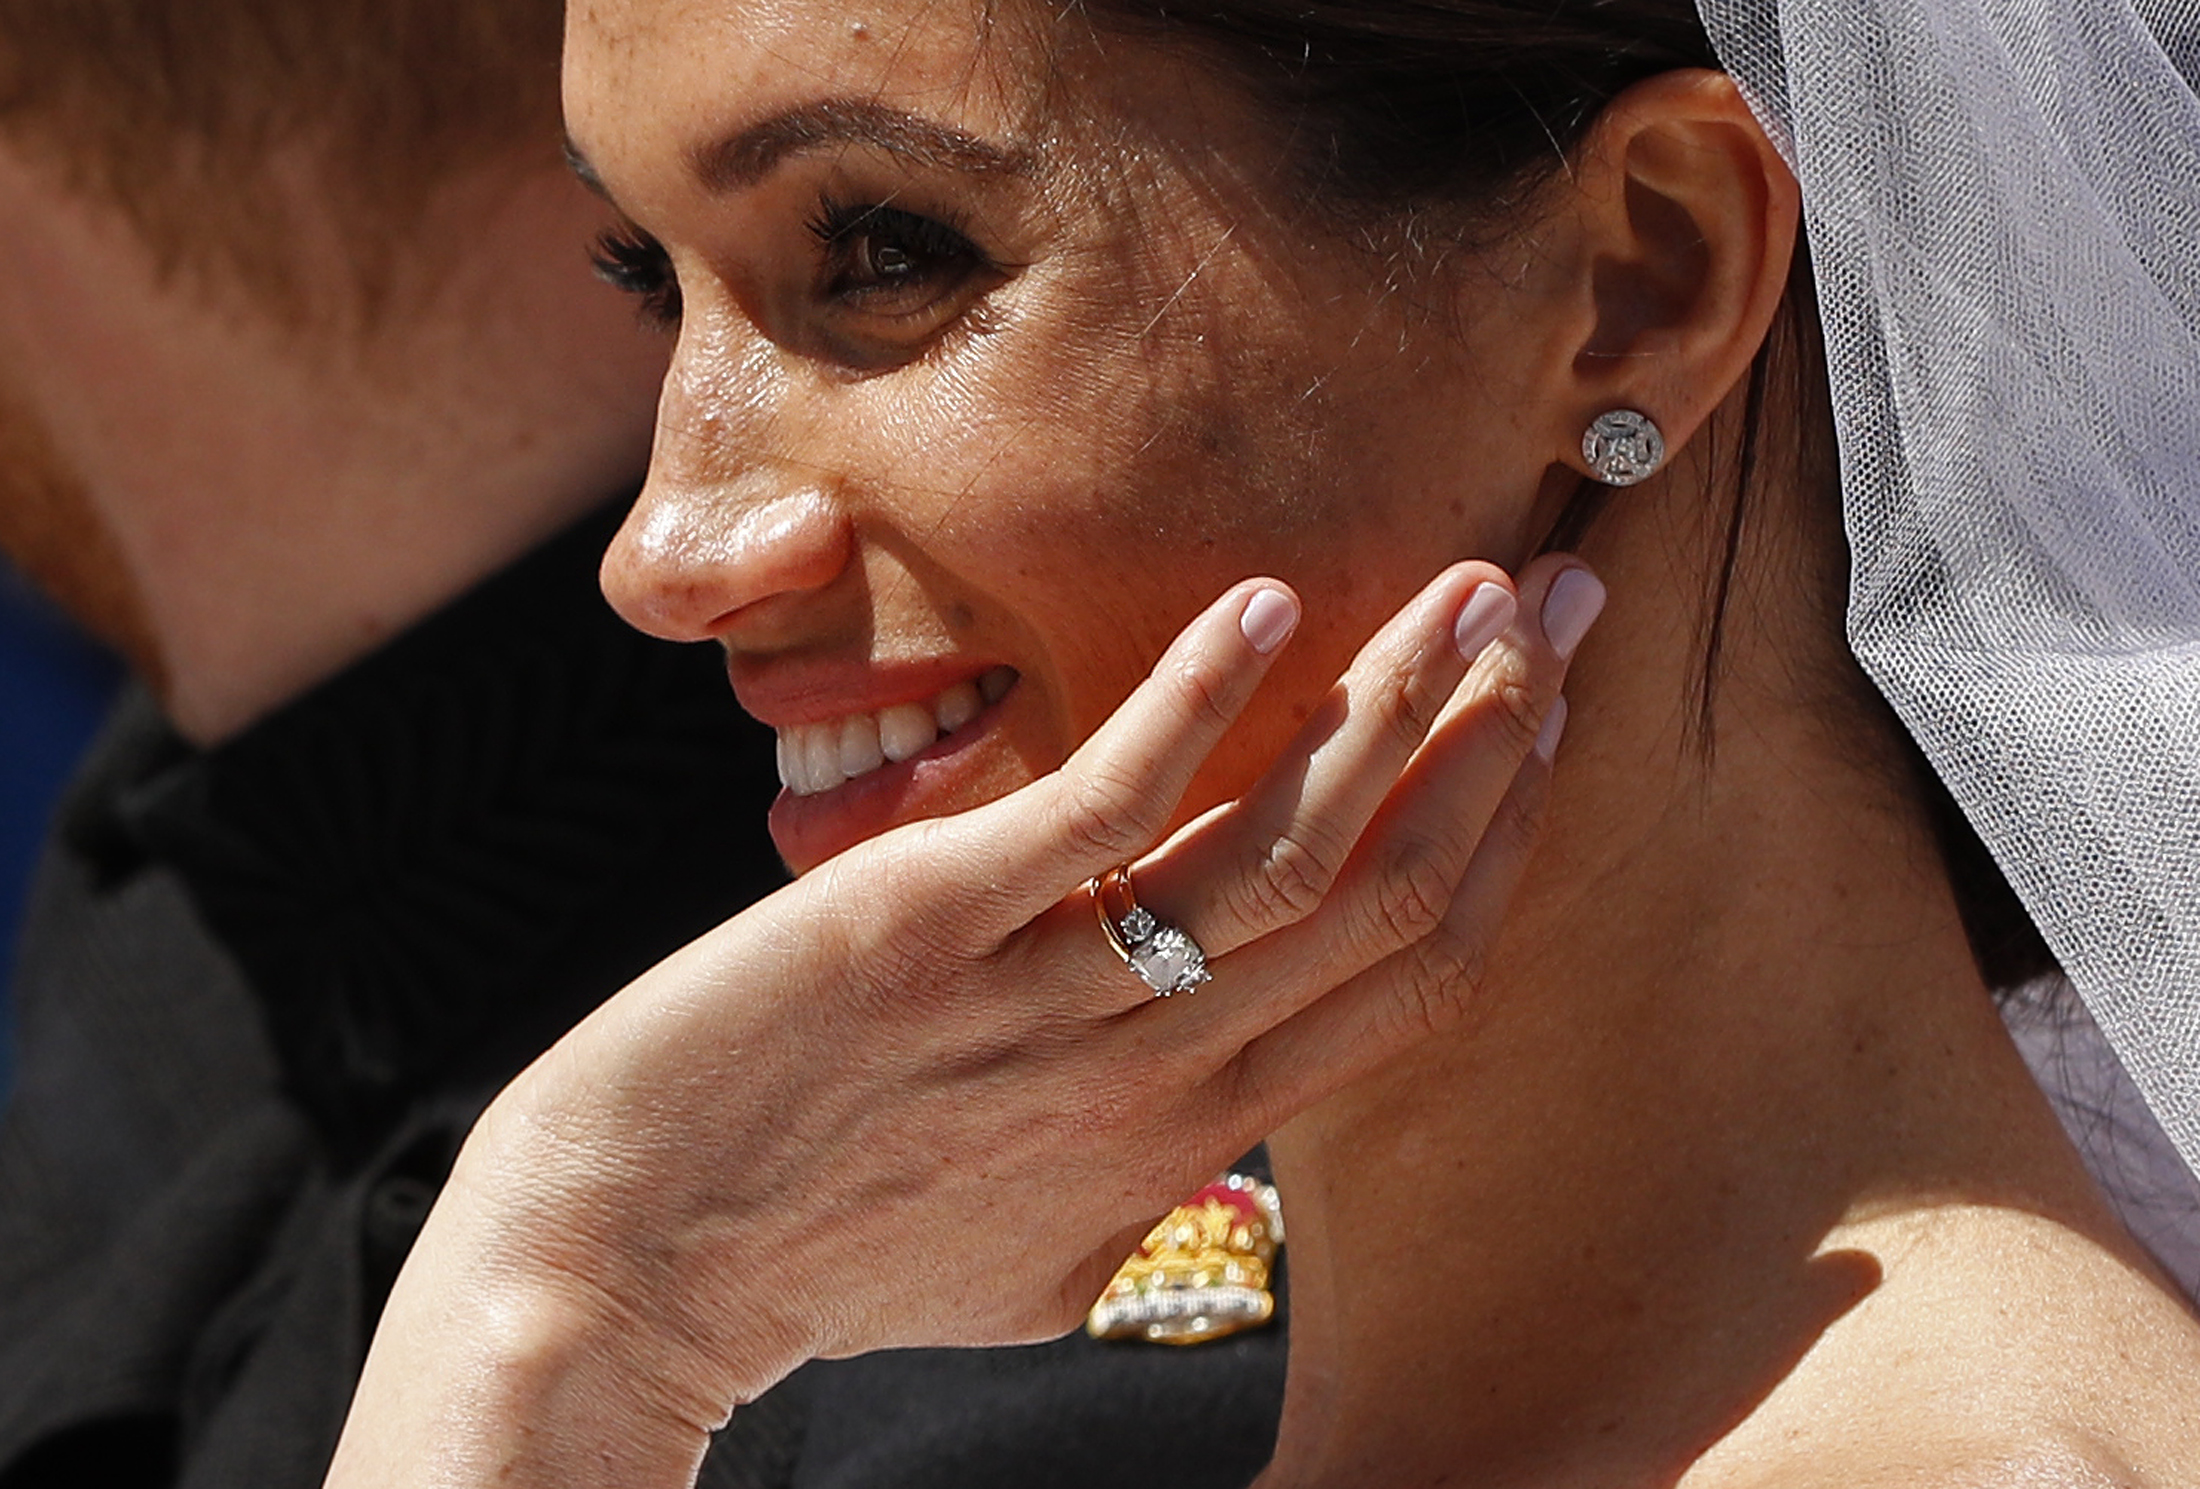 Meghan Markle in a close-up picture on her wedding day in Windsor, 2018 | Source: Getty Images